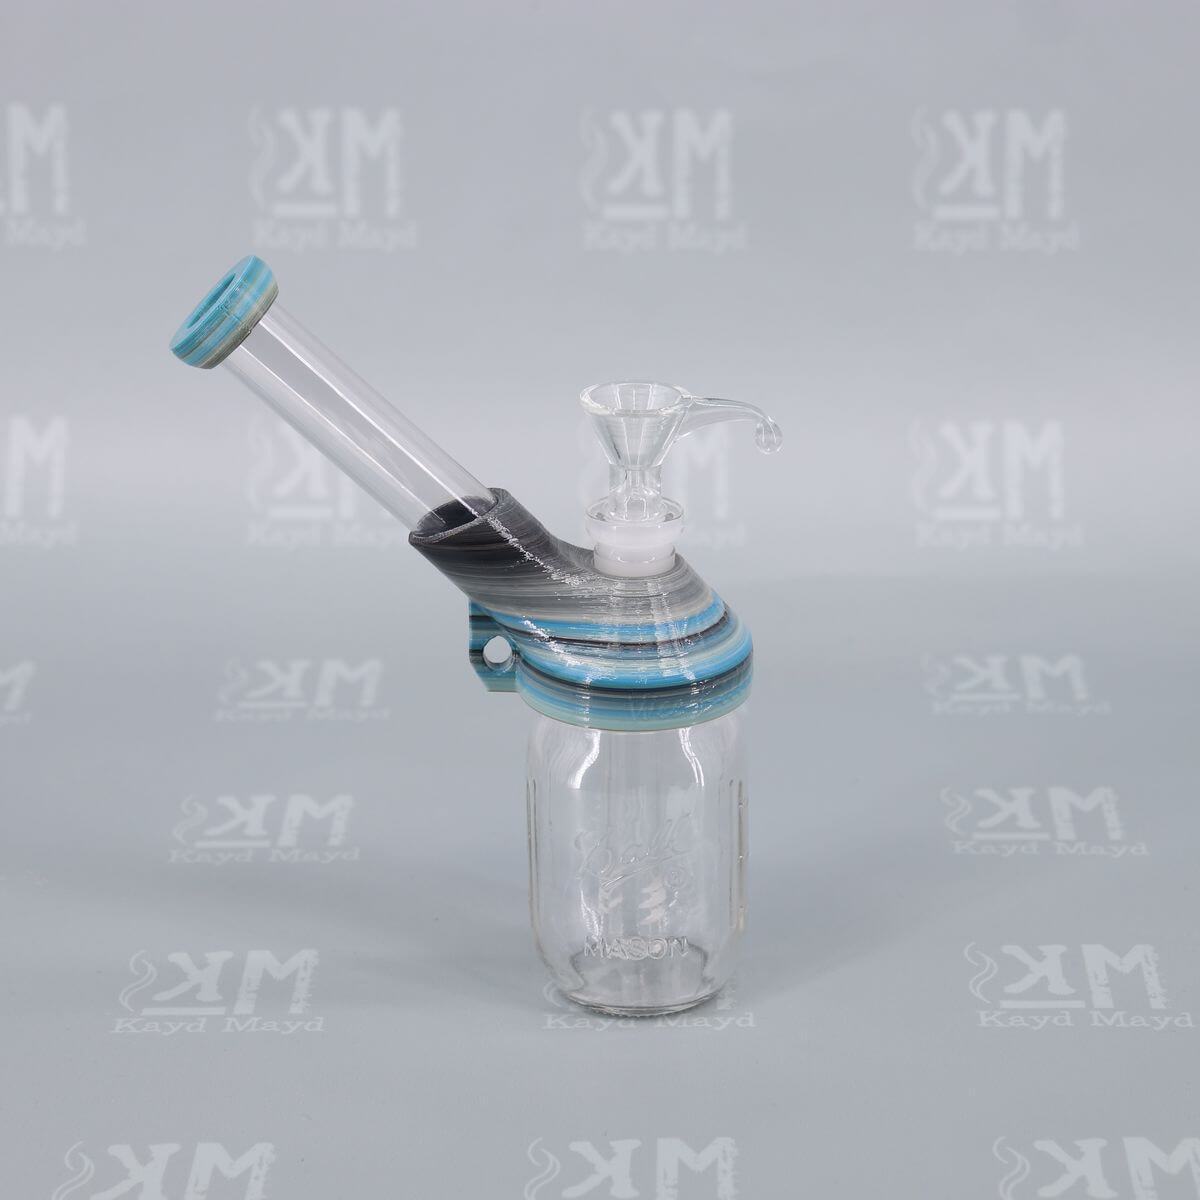 Mountain Range color of Wee Billy Bubbler No. 1 - Amazing 3D Printed Water Pipe by Kayd Mayd